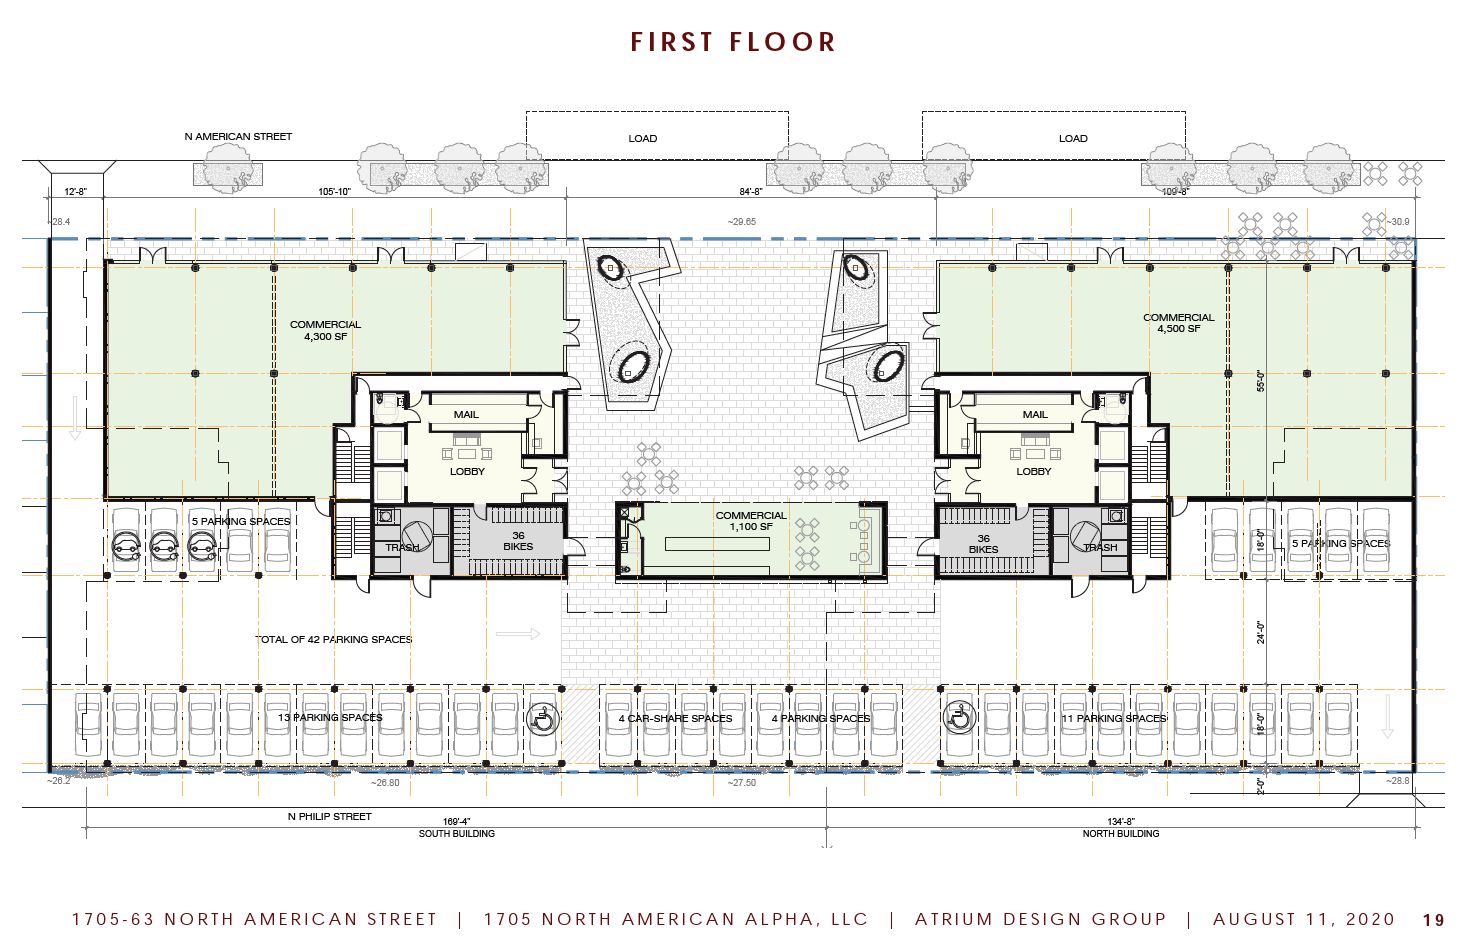 The Luxe Phase I at 1705 North American Street. Floor plan. Credit: Atrium Design Group via Civic Design Review